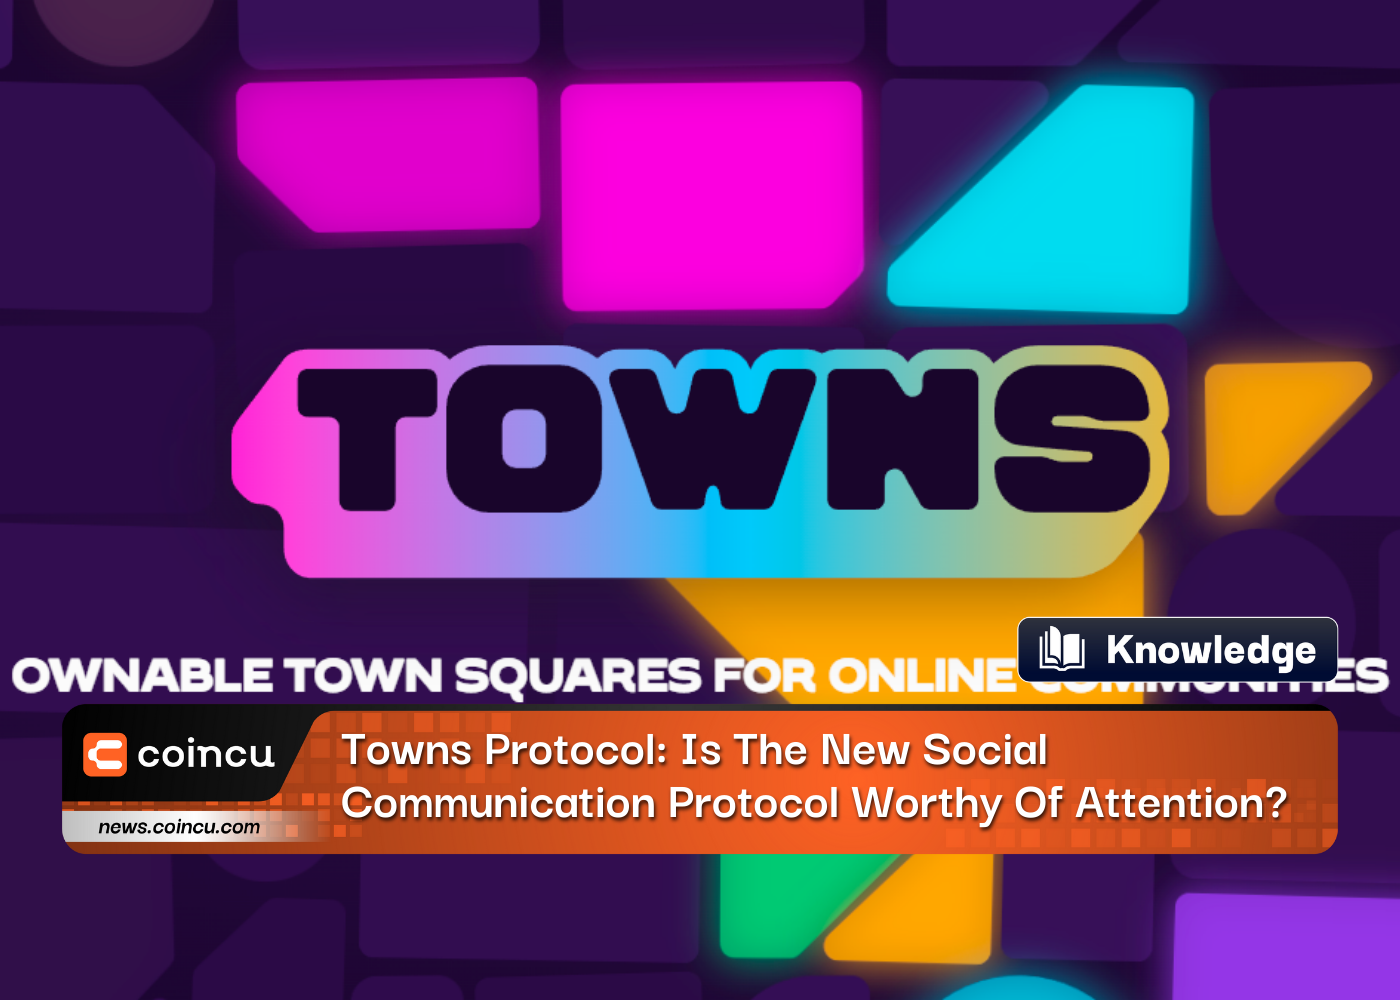 Towns Protocol: Is The New Social Communication Protocol Worthy Of Attention?